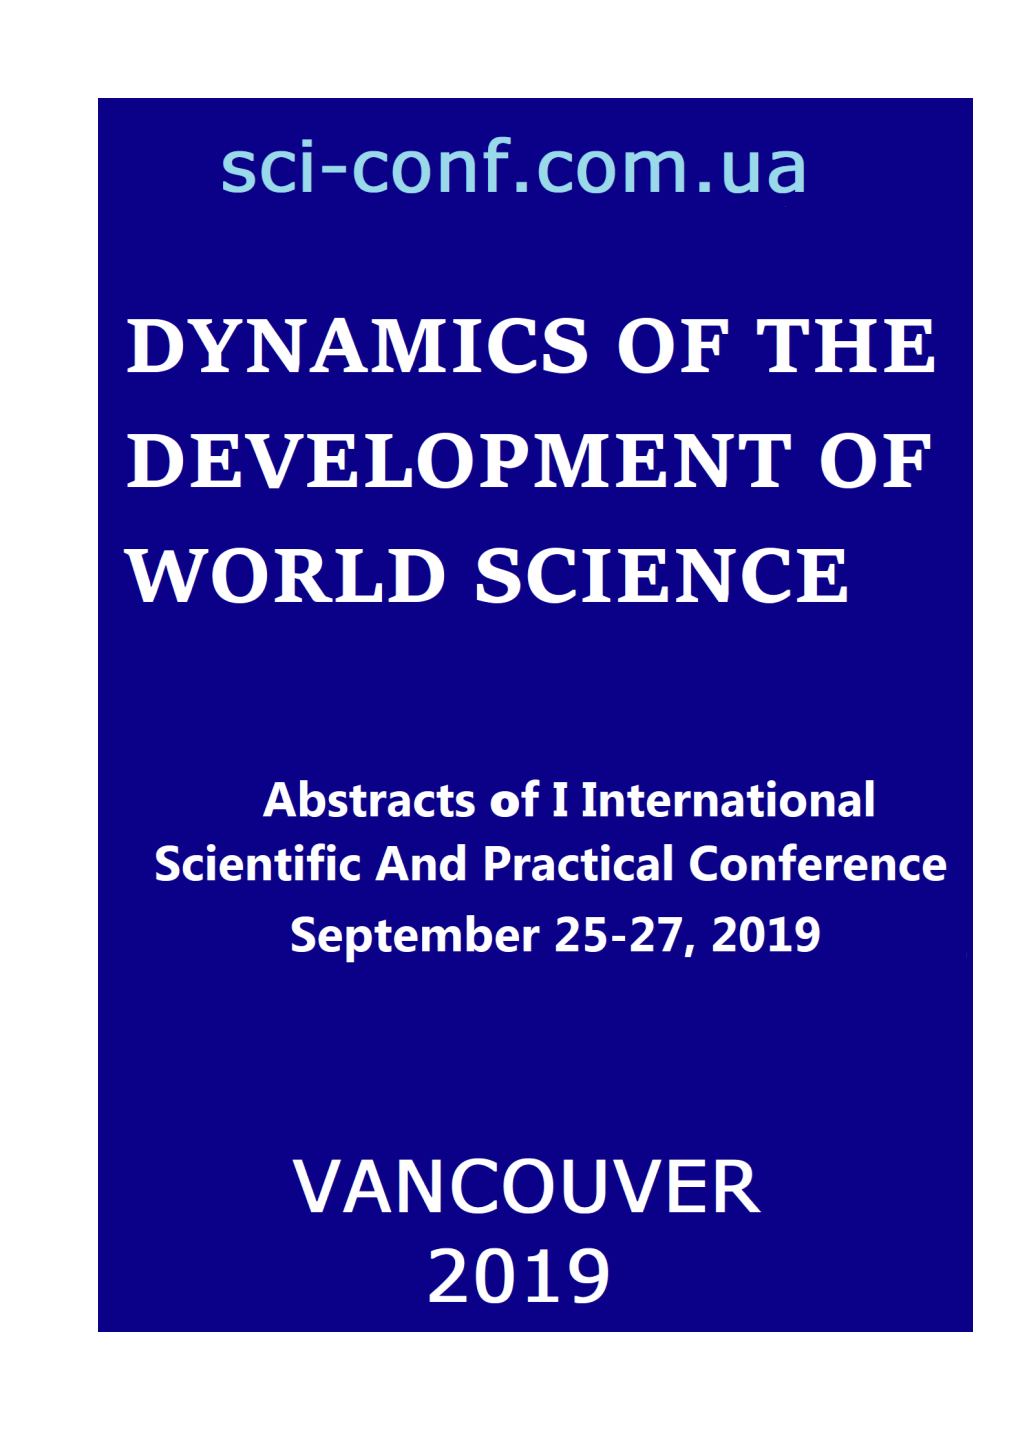 Dynamics of the Development of World Science